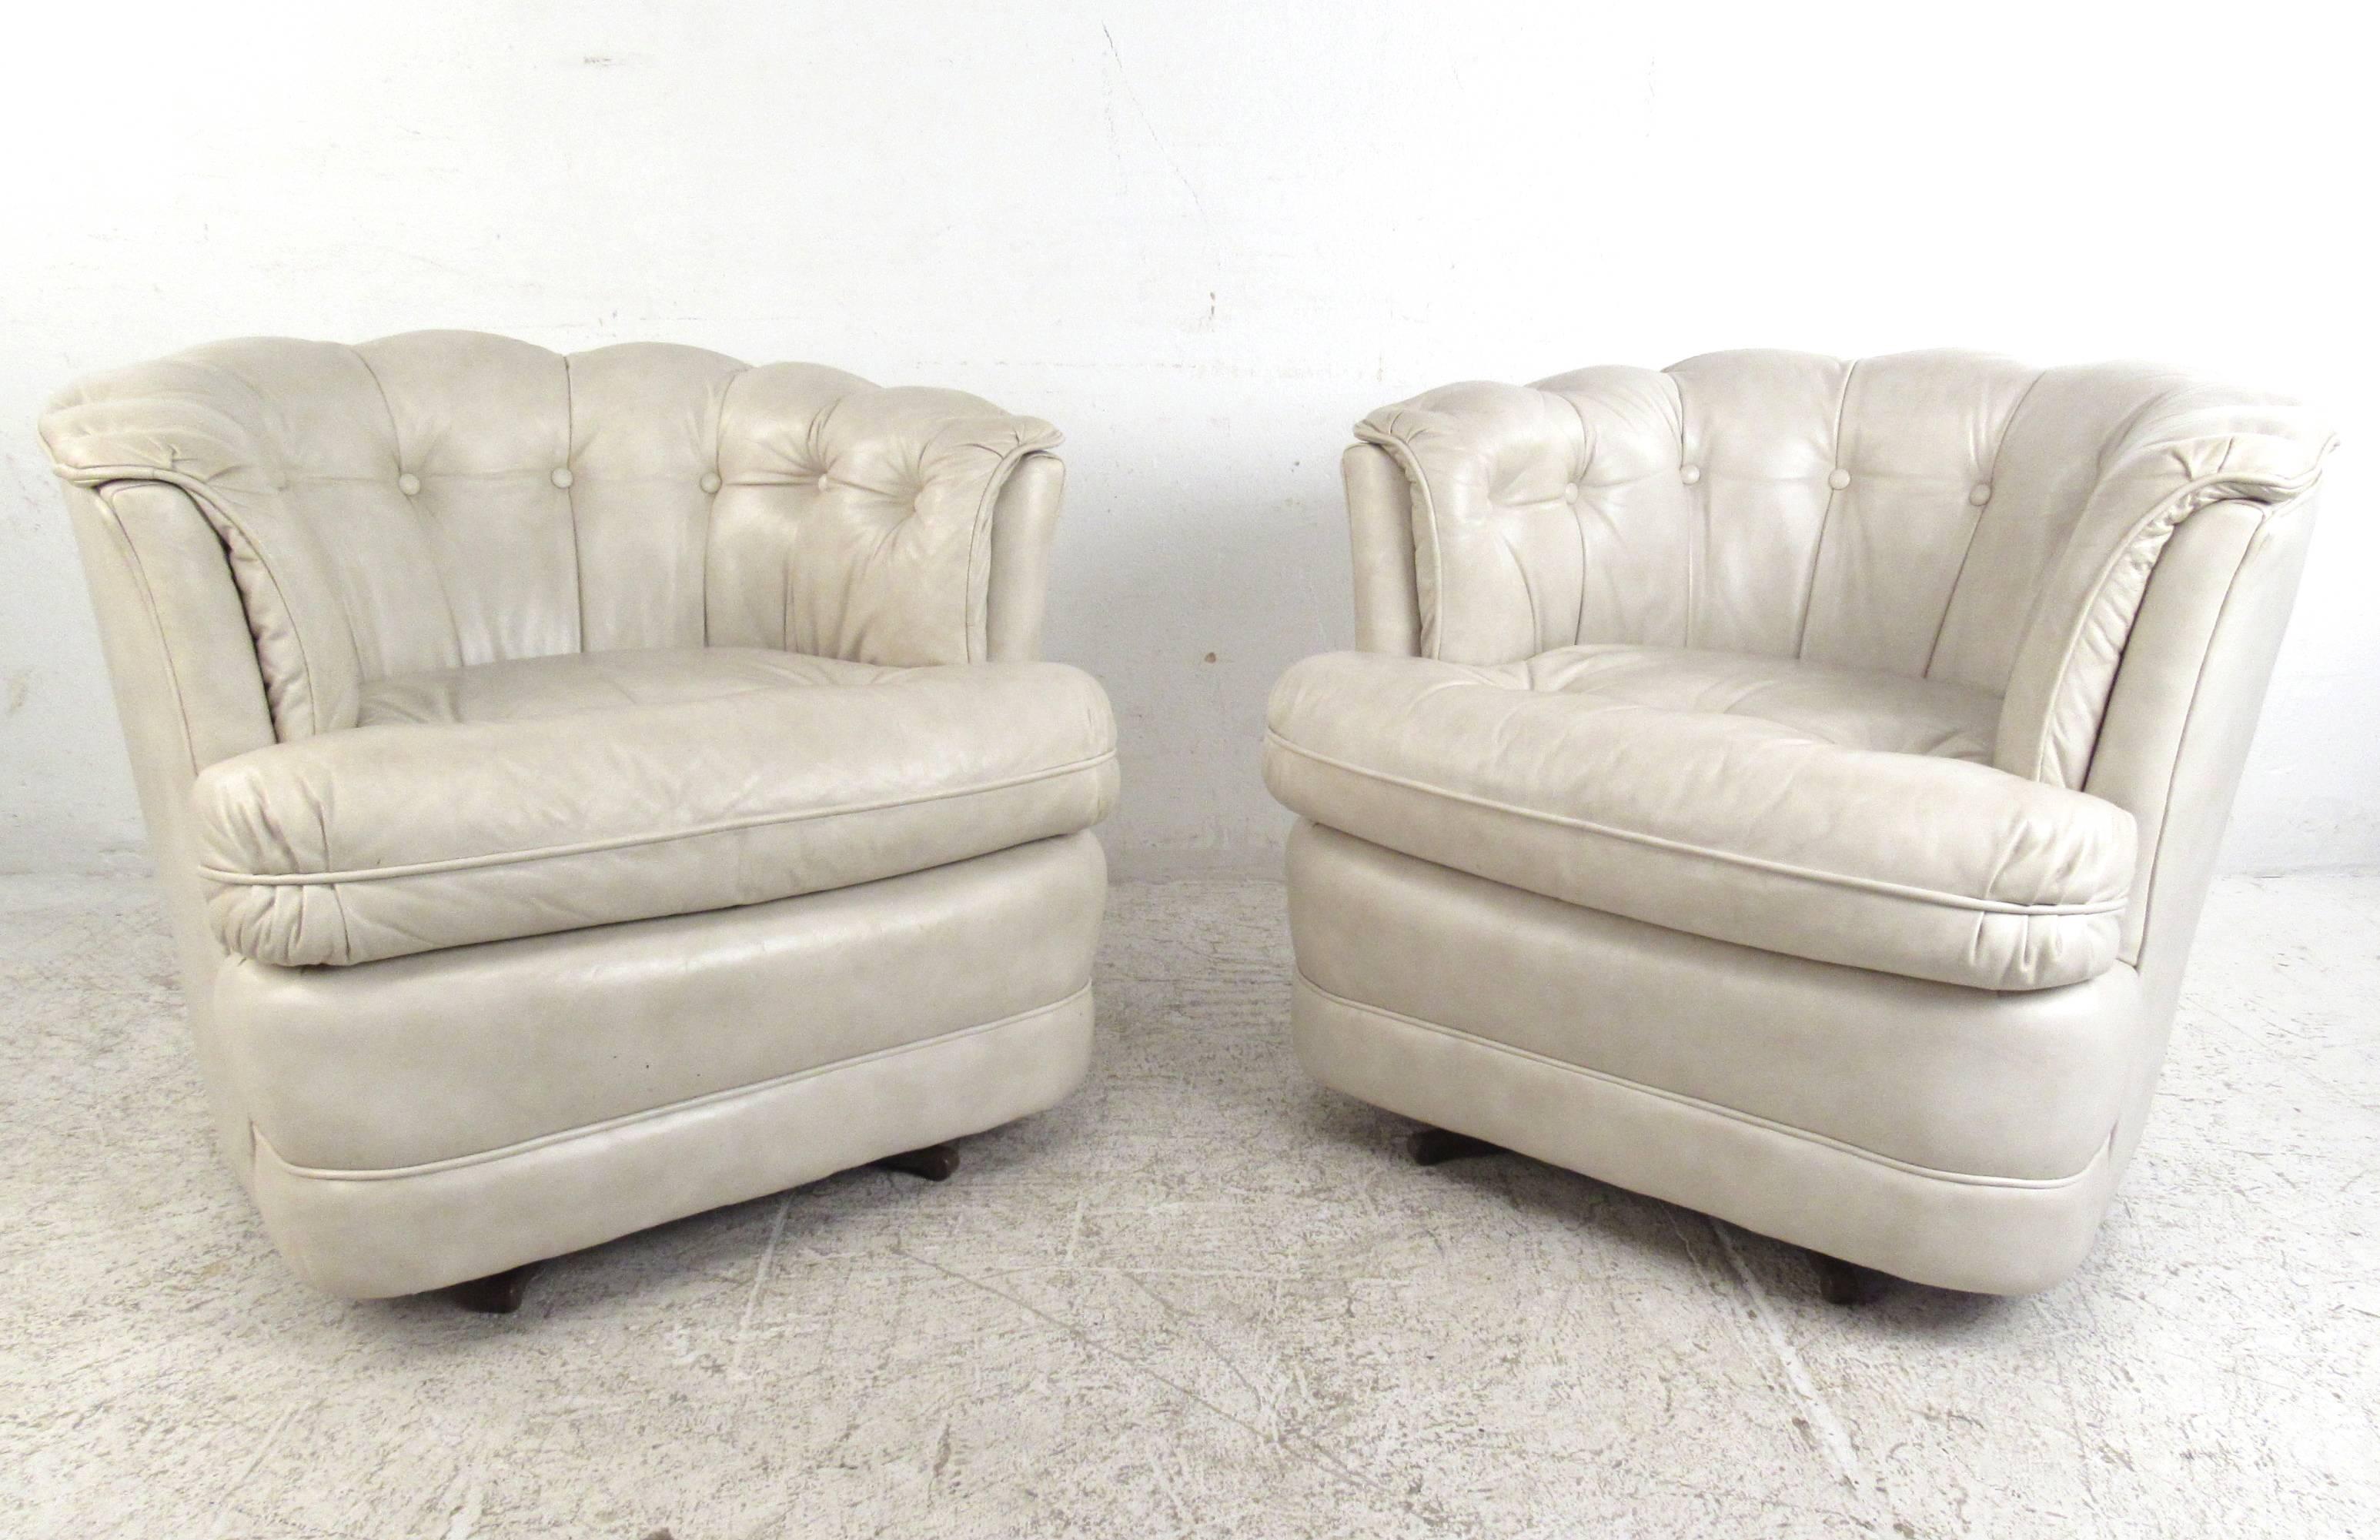 This Mid-Century pair of tufted white leather swivel chairs by Classic Leather (USA) provides the perfect mix of comfort and style. Comfortable upholstery with their barrel back shape is wonderfully accented by the vintage style of the pair. Swivel